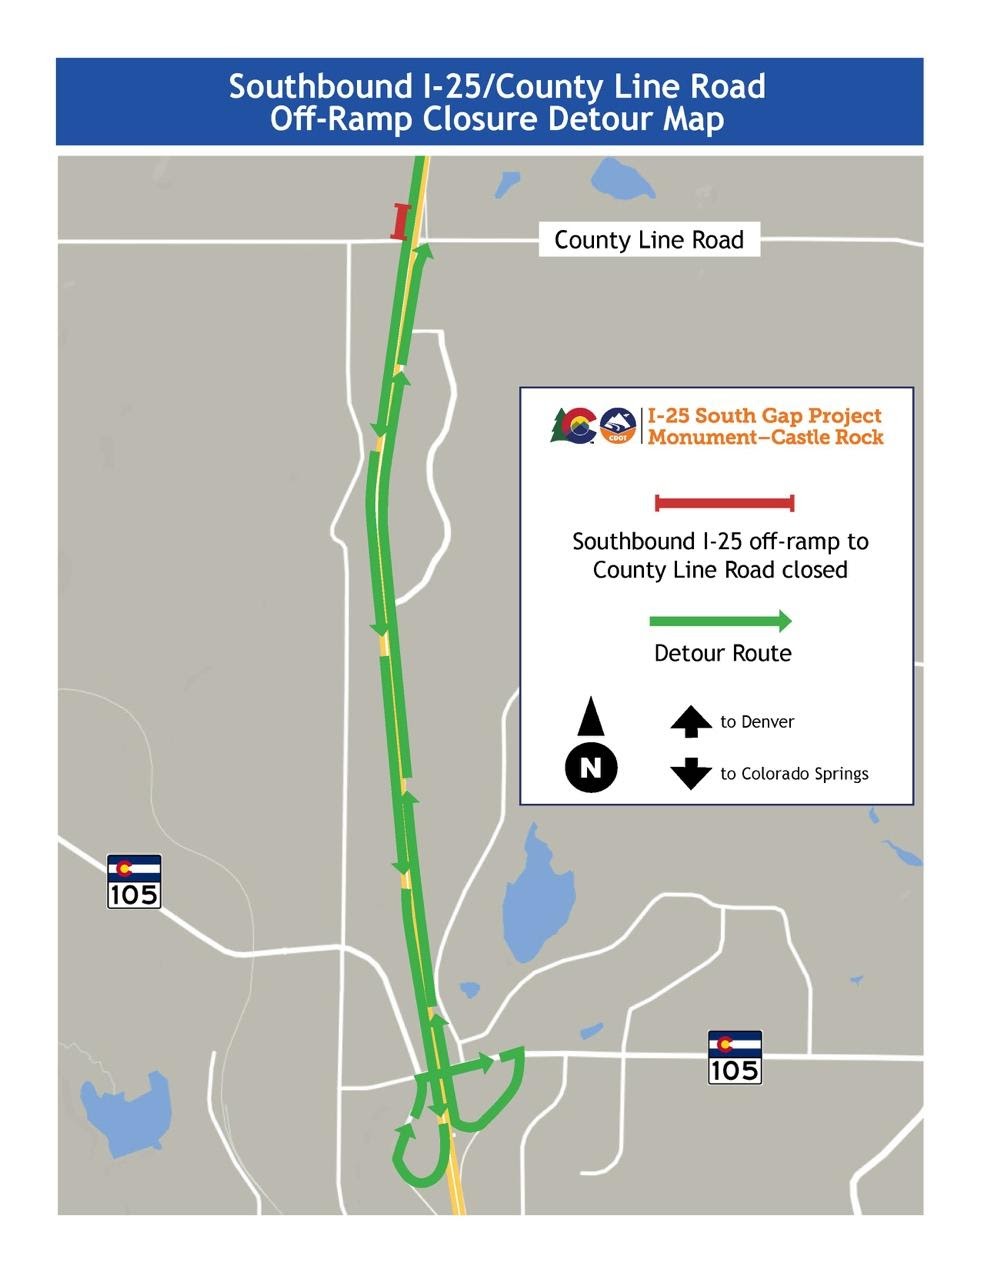 Southbound I-25/County Line Road Off-Ramp Closure Detour Map detail image